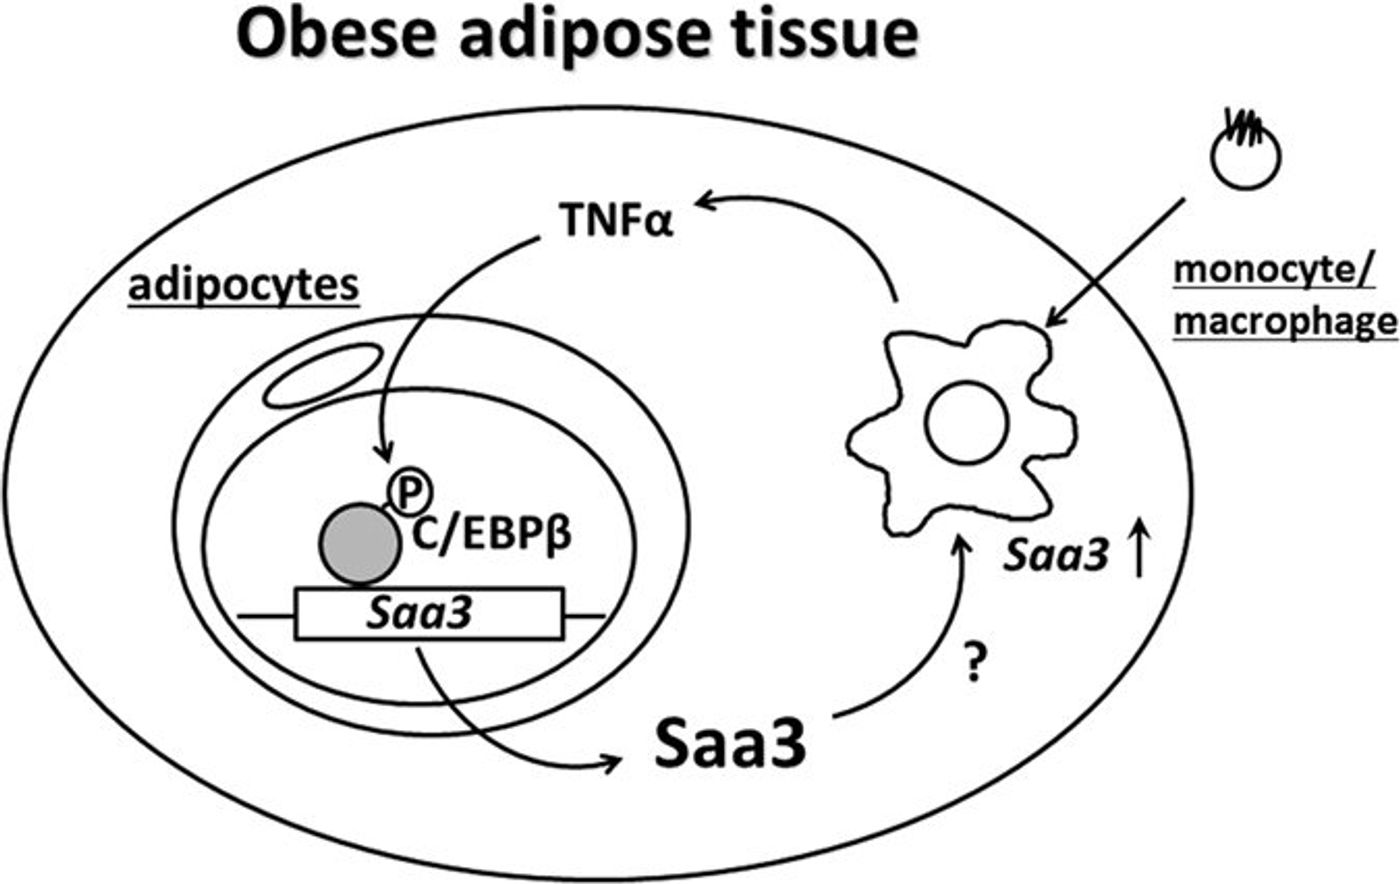 Saa3 gene promoter in adipocytes responds to activated macrophages via C/EBPβ signaling. Saa3 mRNA expression could be utilized for monitoring the adipose inflammatory state / Credit: Nature Sanada et al 2017